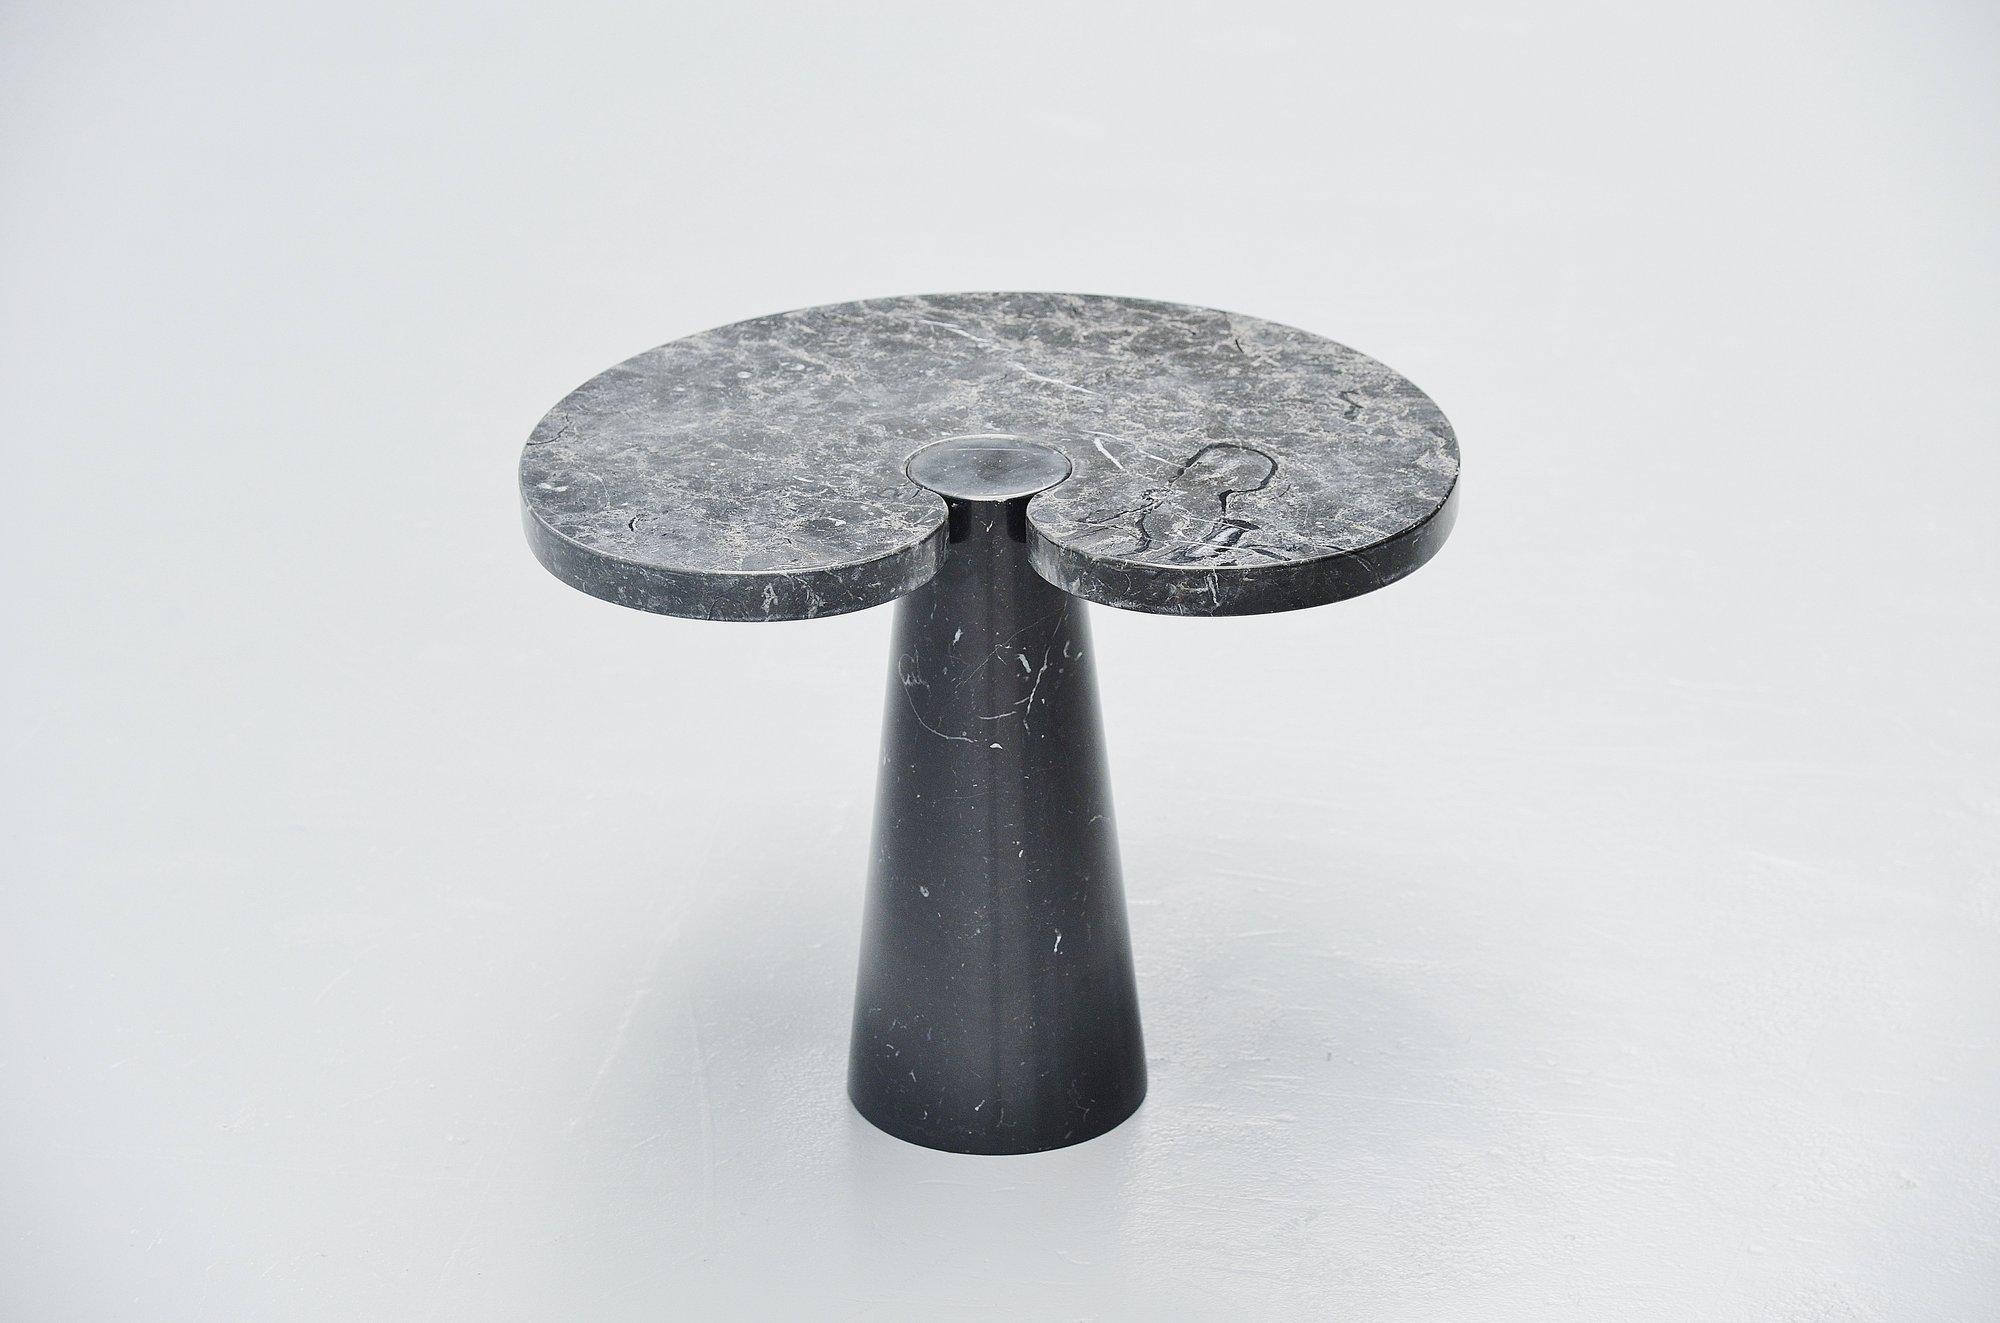 Gorgeous 'Eros' side table designed by Angelo Mangiarotti and manufactured by Skipper, Italy 1971. This table is made of black marguina marble and have beautiful white veins in the black marble, this table has so many white veins that it almost